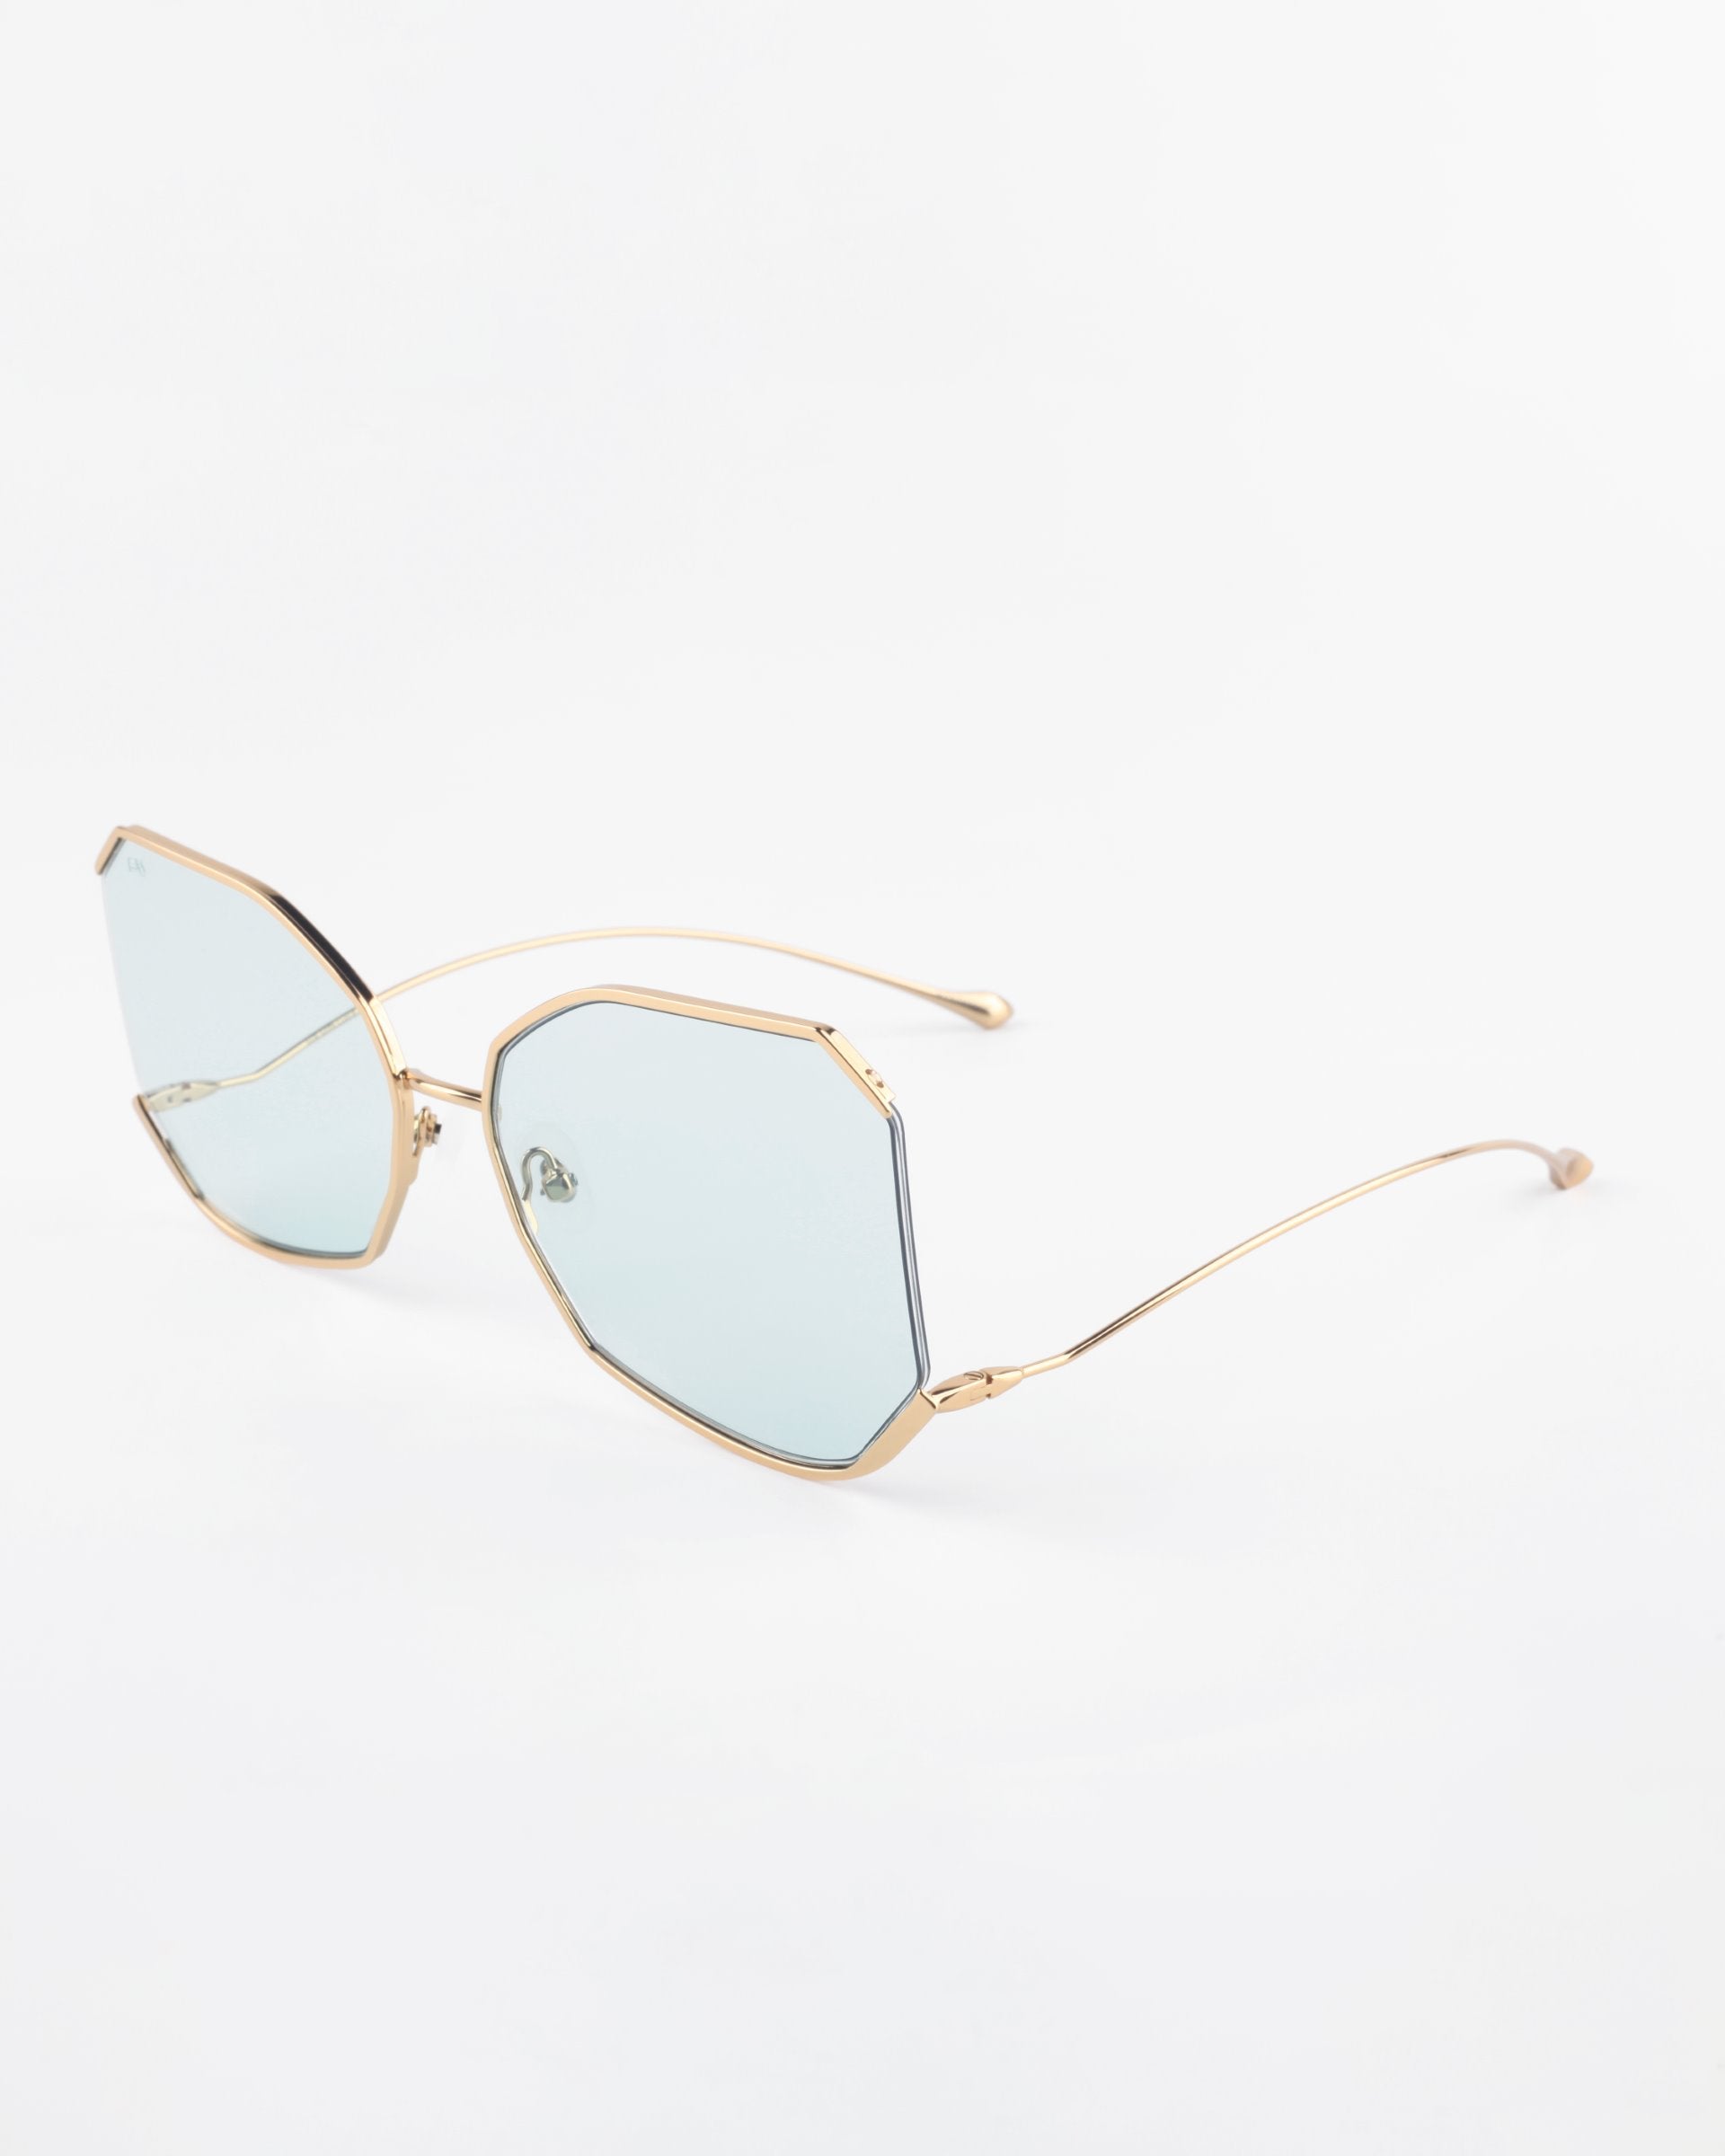 A pair of stylish eyeglasses with a geometric, hexagonal frame featuring light blue tinted lenses. The Painter by For Art&#39;s Sake® has a thin, gold-plated stainless steel frame and temples with a minimalist and modern design. The ultra-lightweight Nylon lenses offer 100% UVA &amp; UVB protection. They are placed on a plain white background.